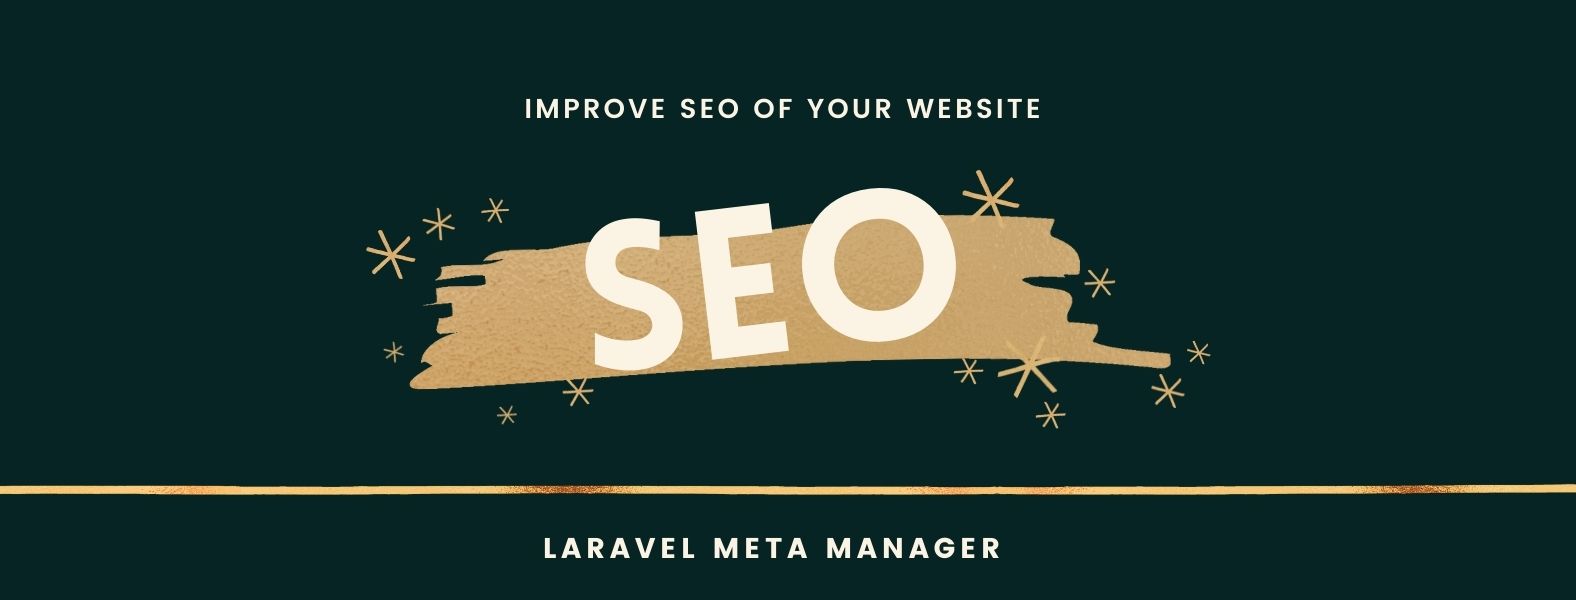 Improve SEO of your website with Laravel Meta Manager